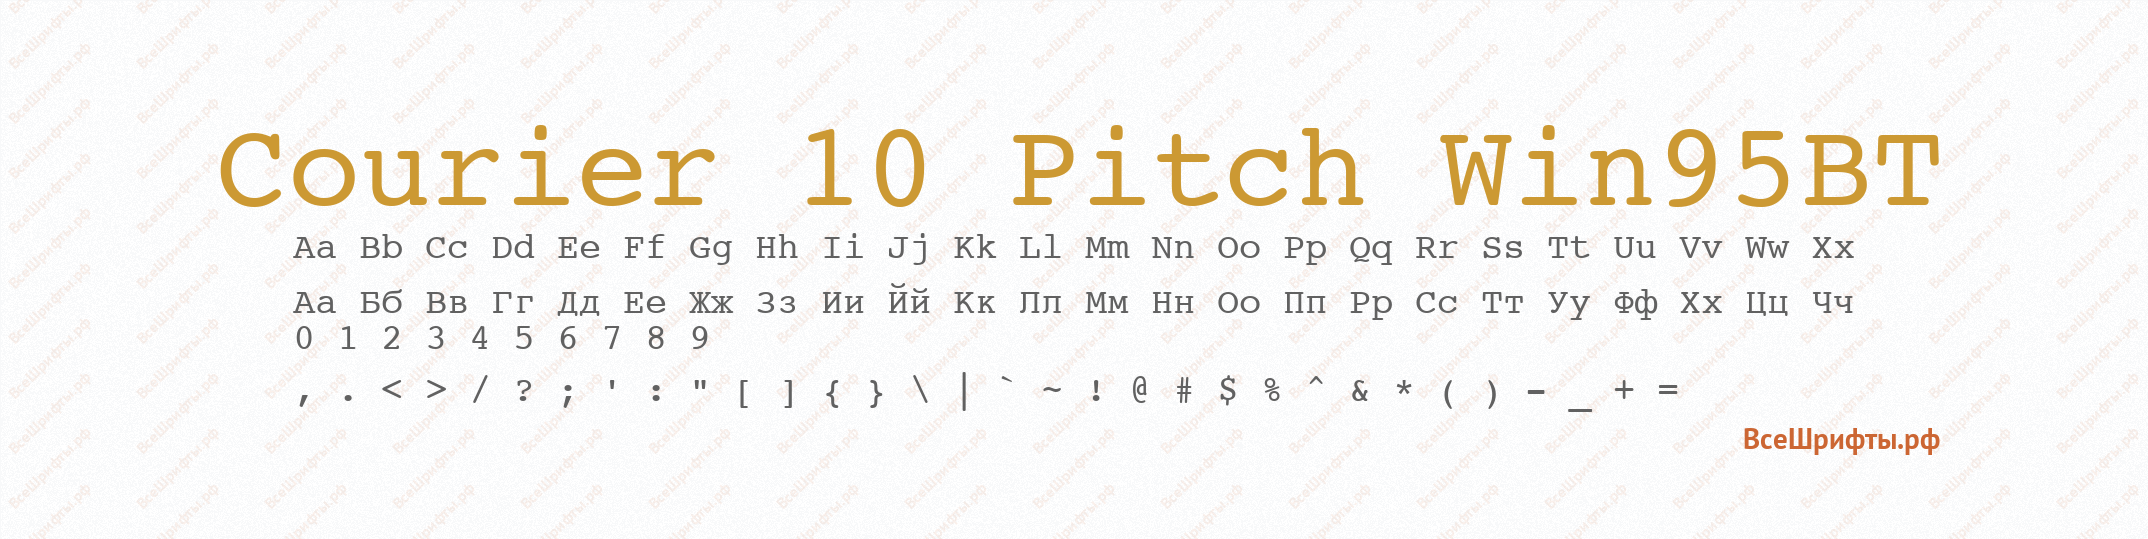 Шрифт Courier 10 Pitch Win95BT